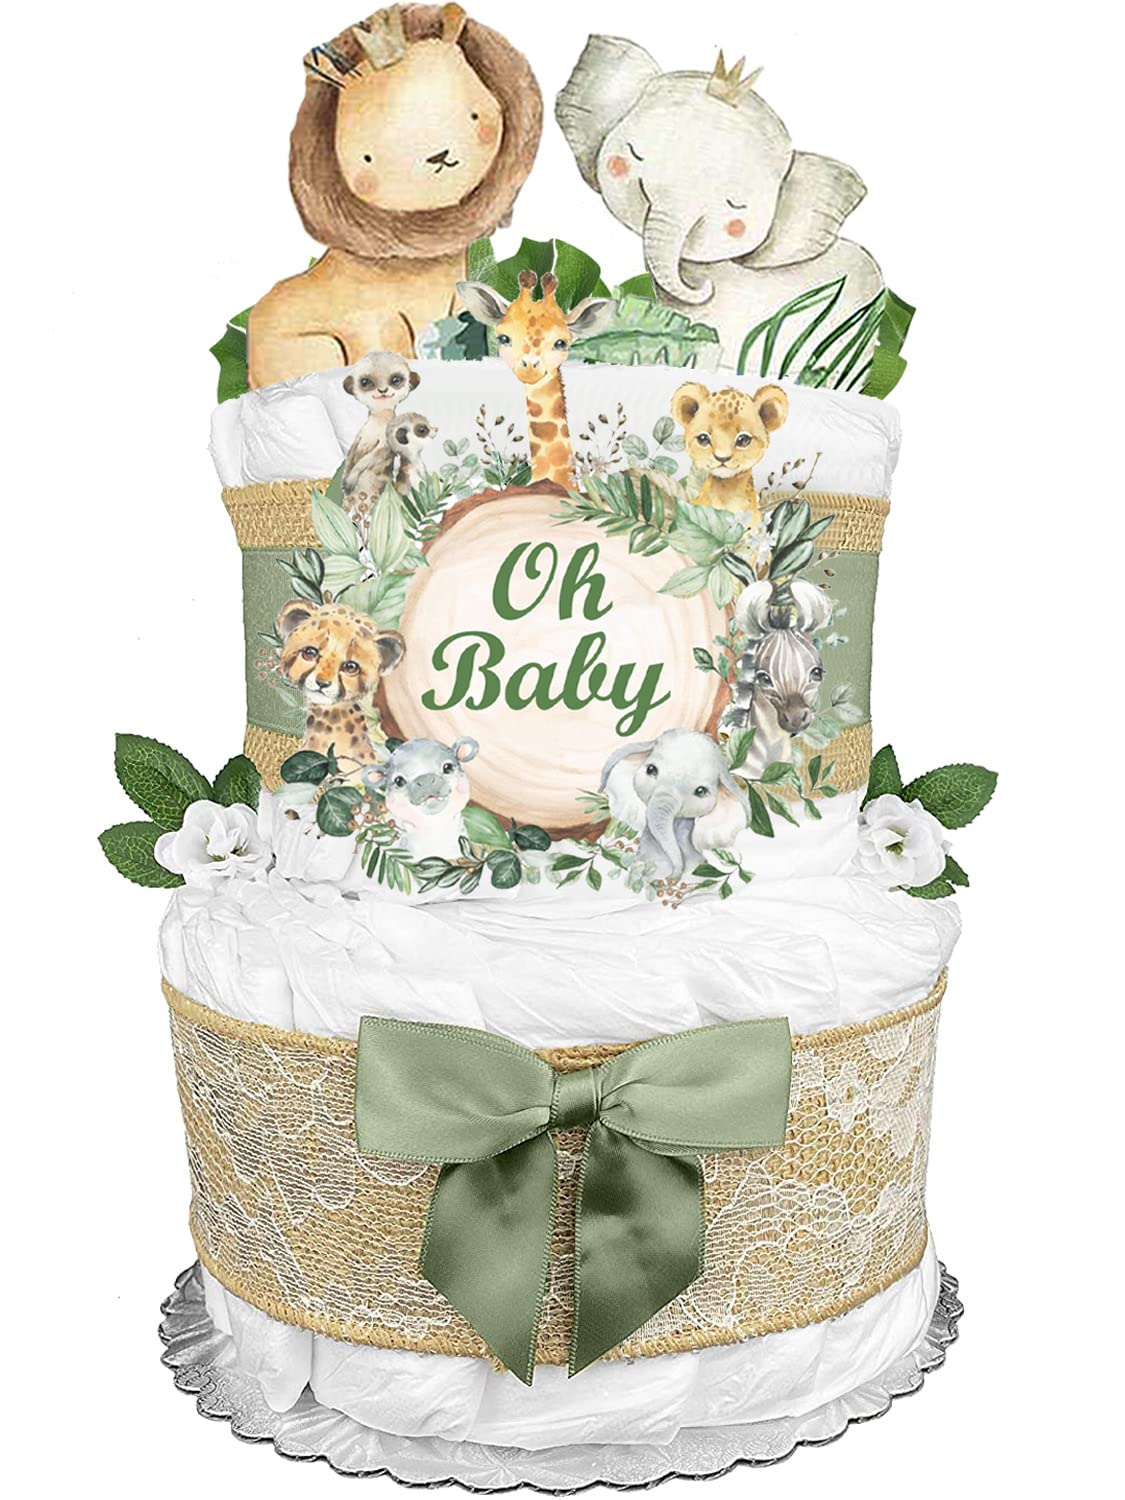 1 Tier Lemon Neutral Nappy Cake Baby Shower Gift FREE POSTAGE!! 